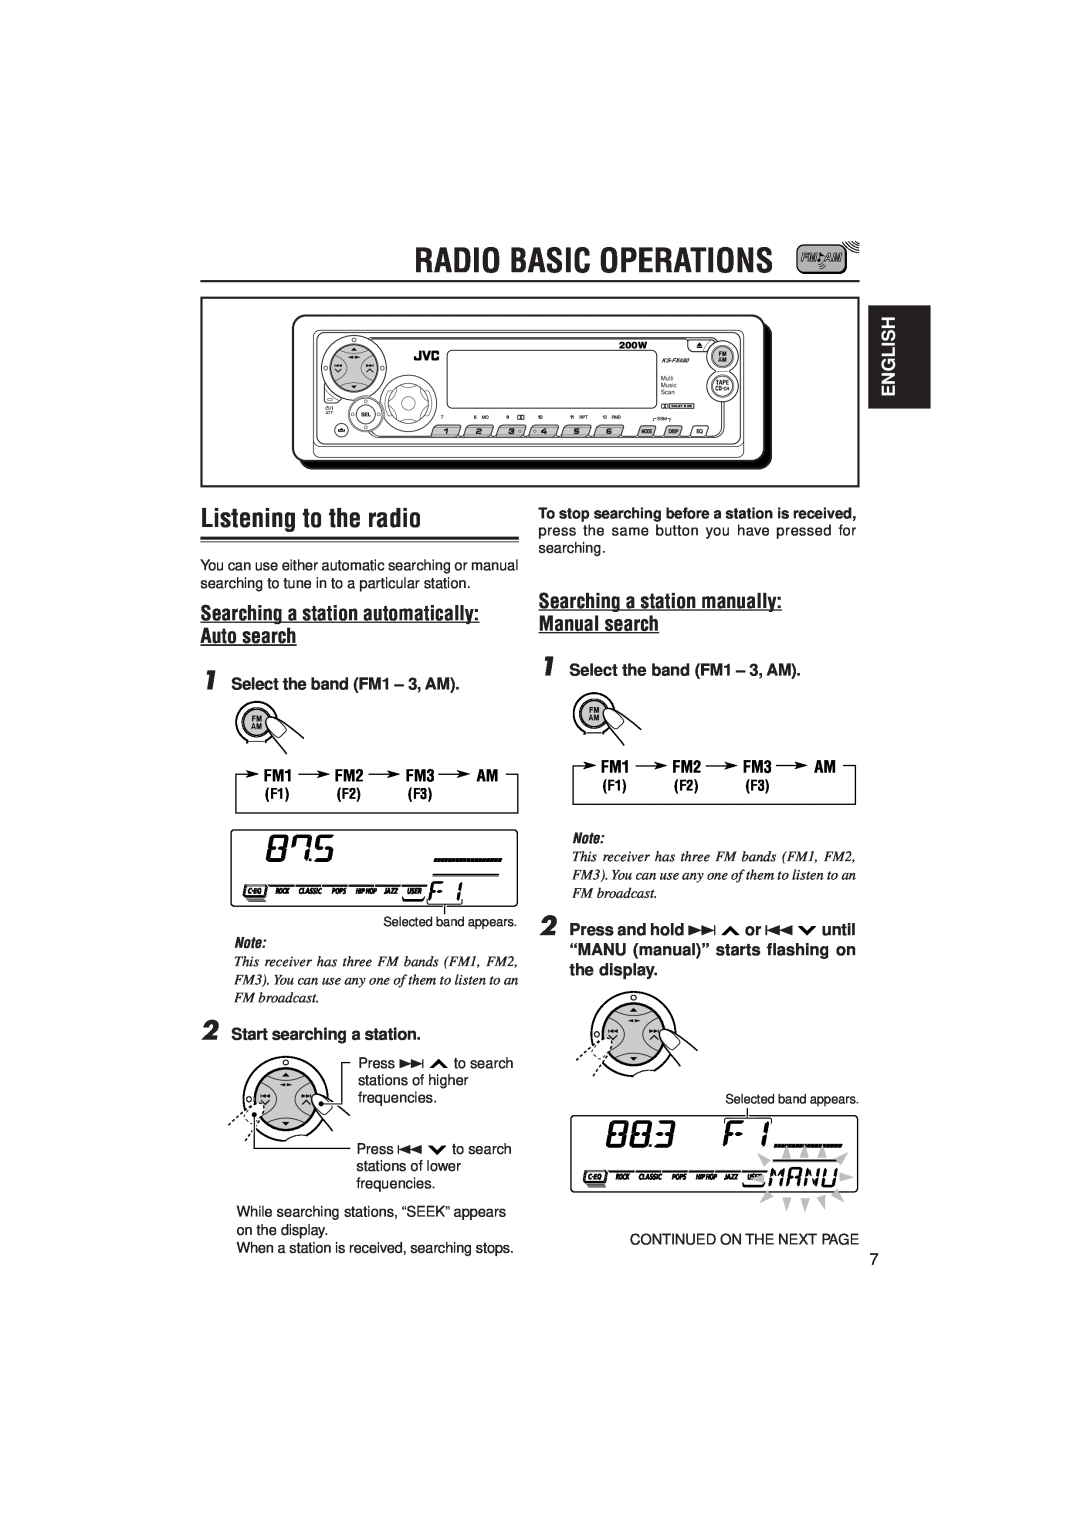 JVC KS-FX480J manual Radio Basic Operations, Listening to the radio, Searching a station automatically Auto search, English 